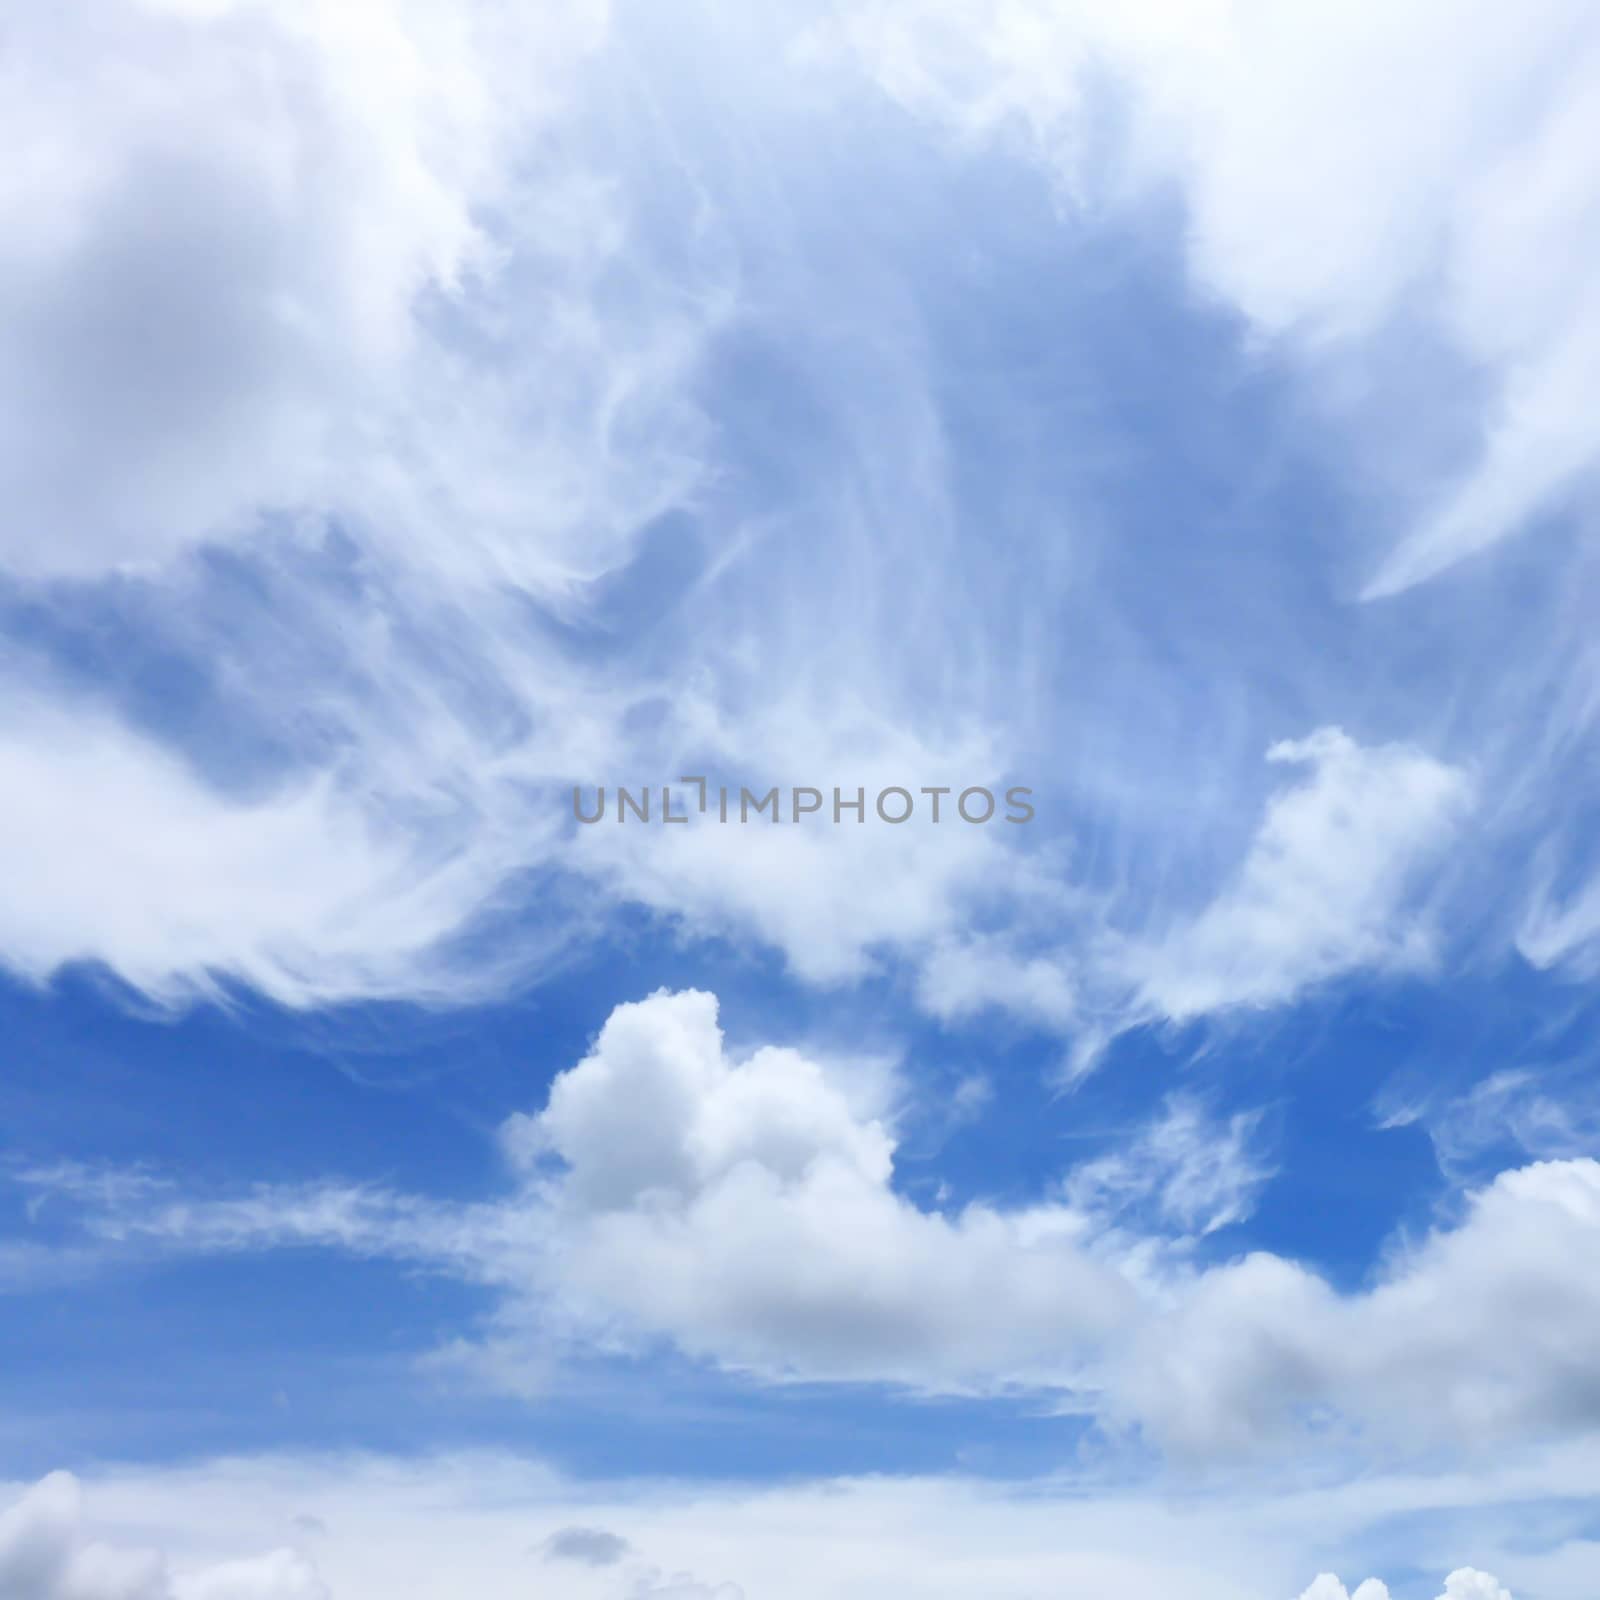 The soft clounds on bright blue sky background